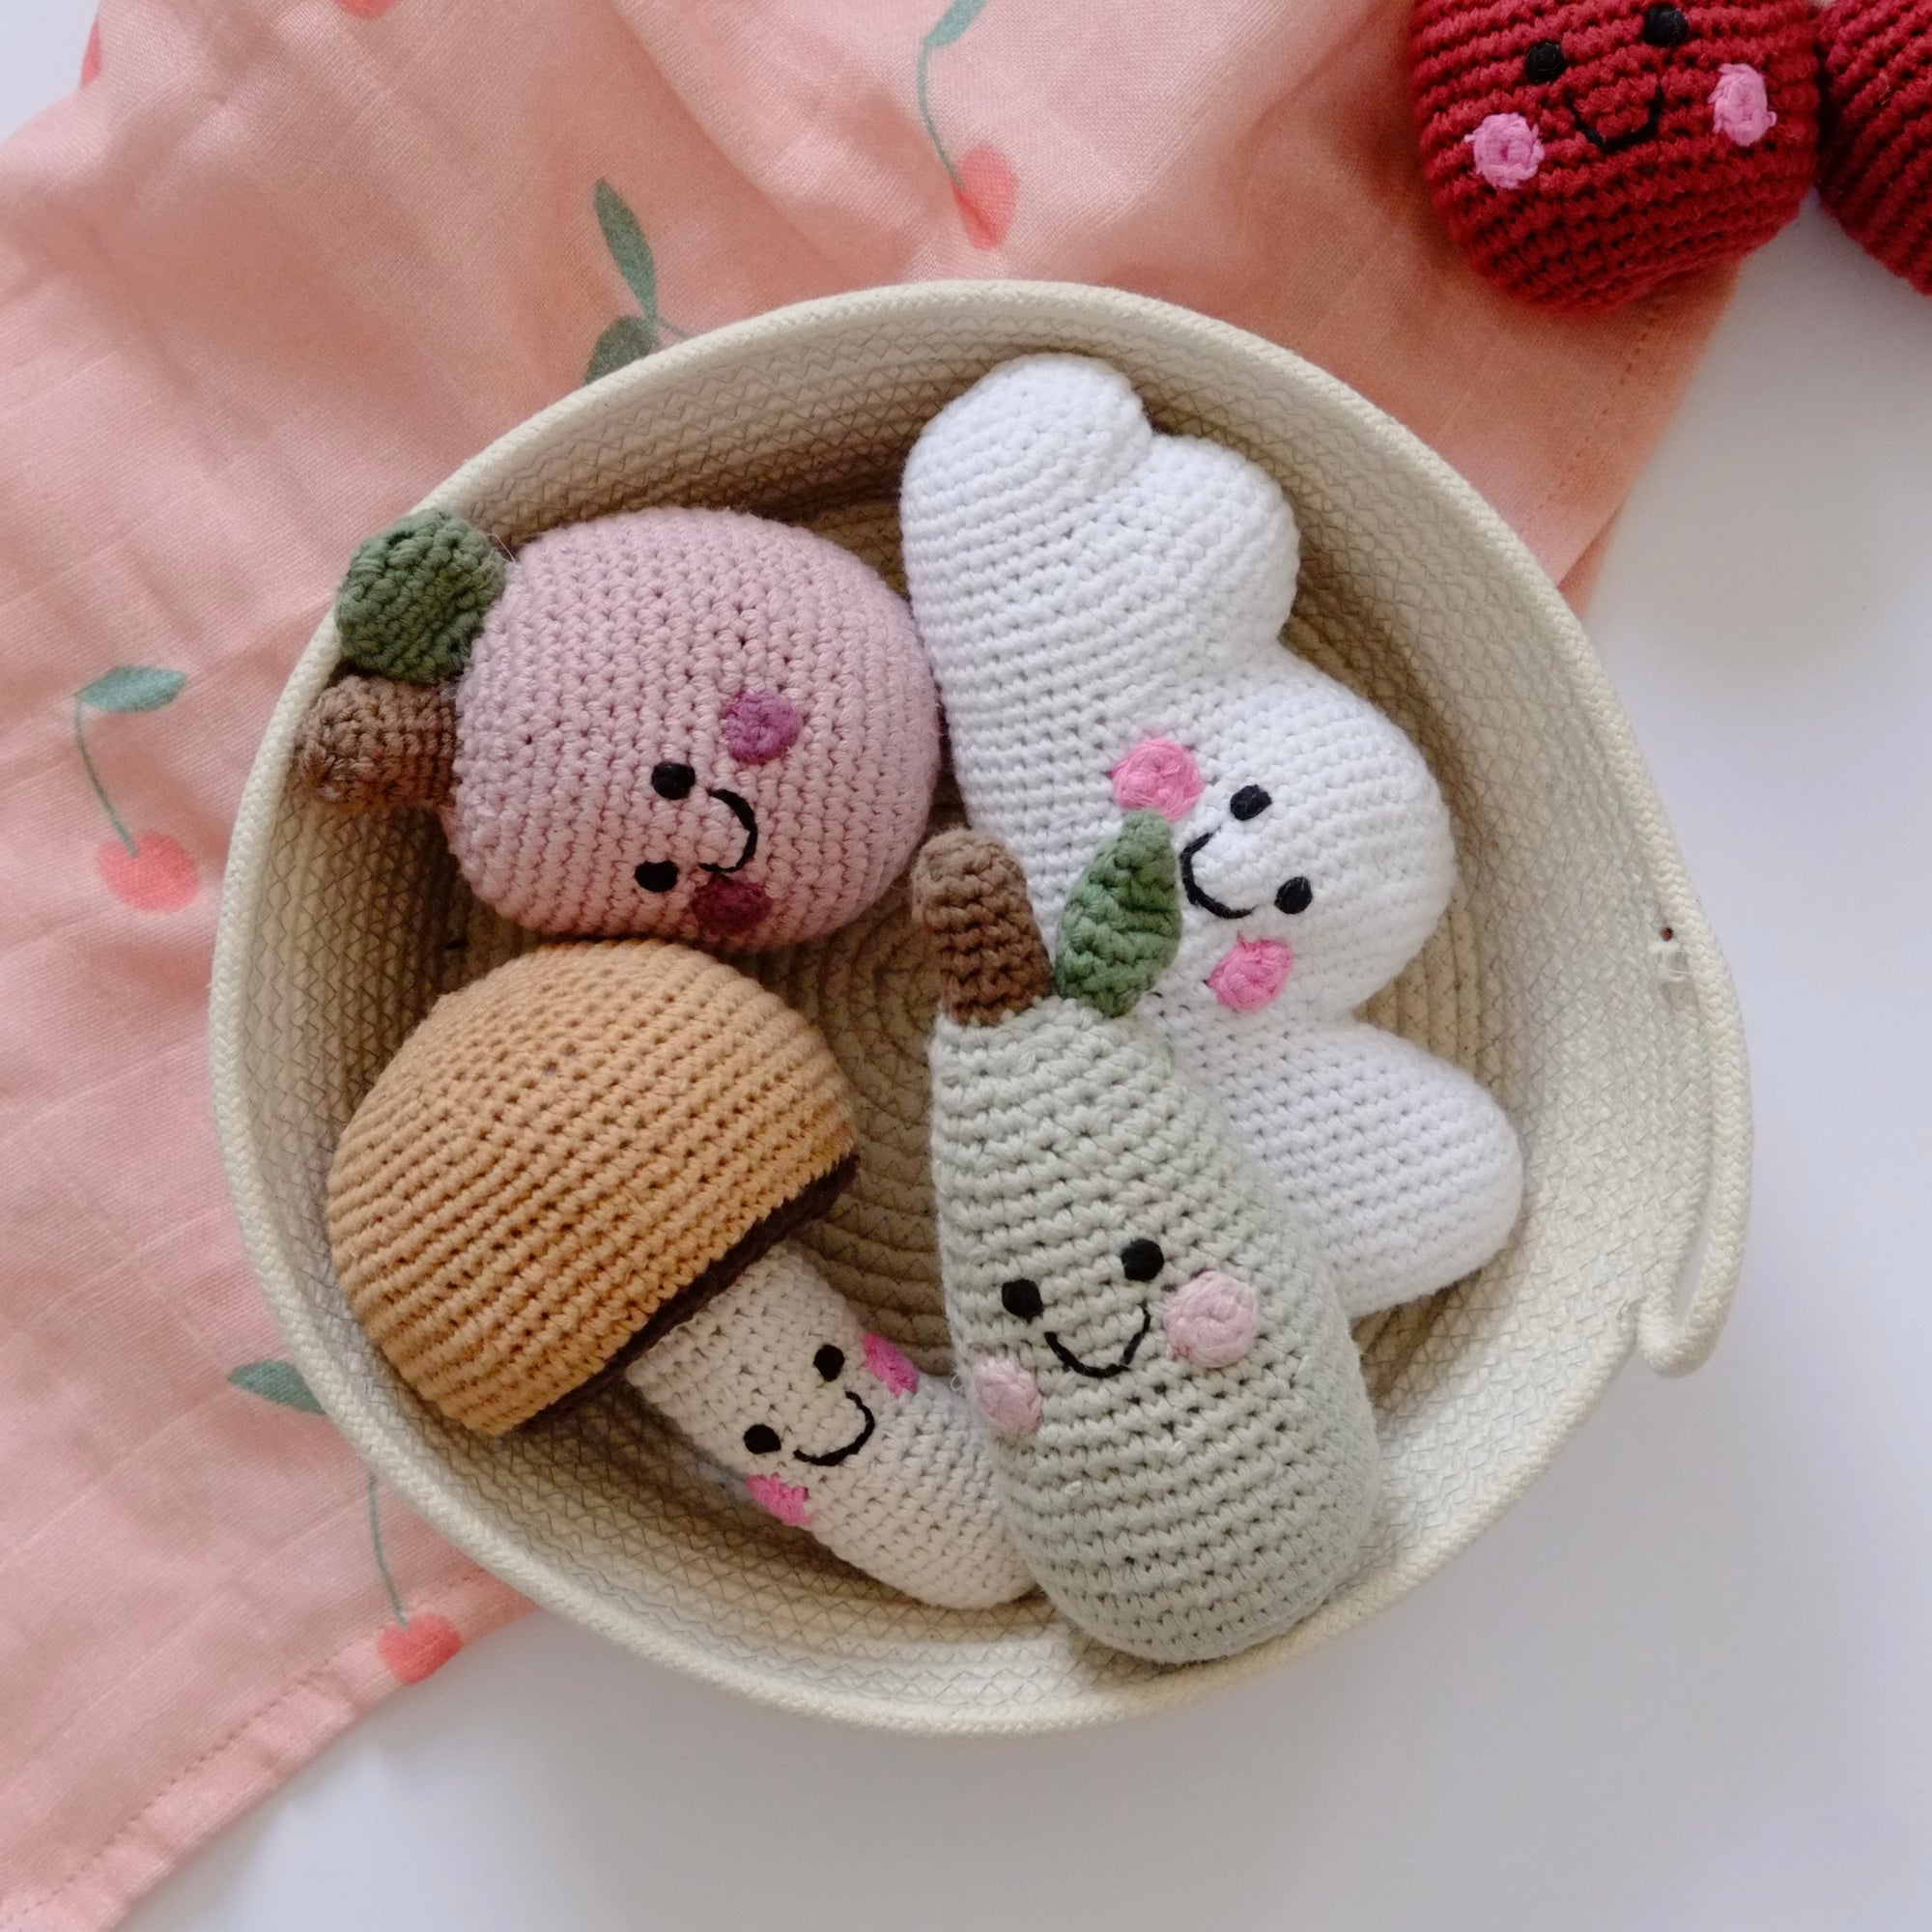 A collection of crochet rattles